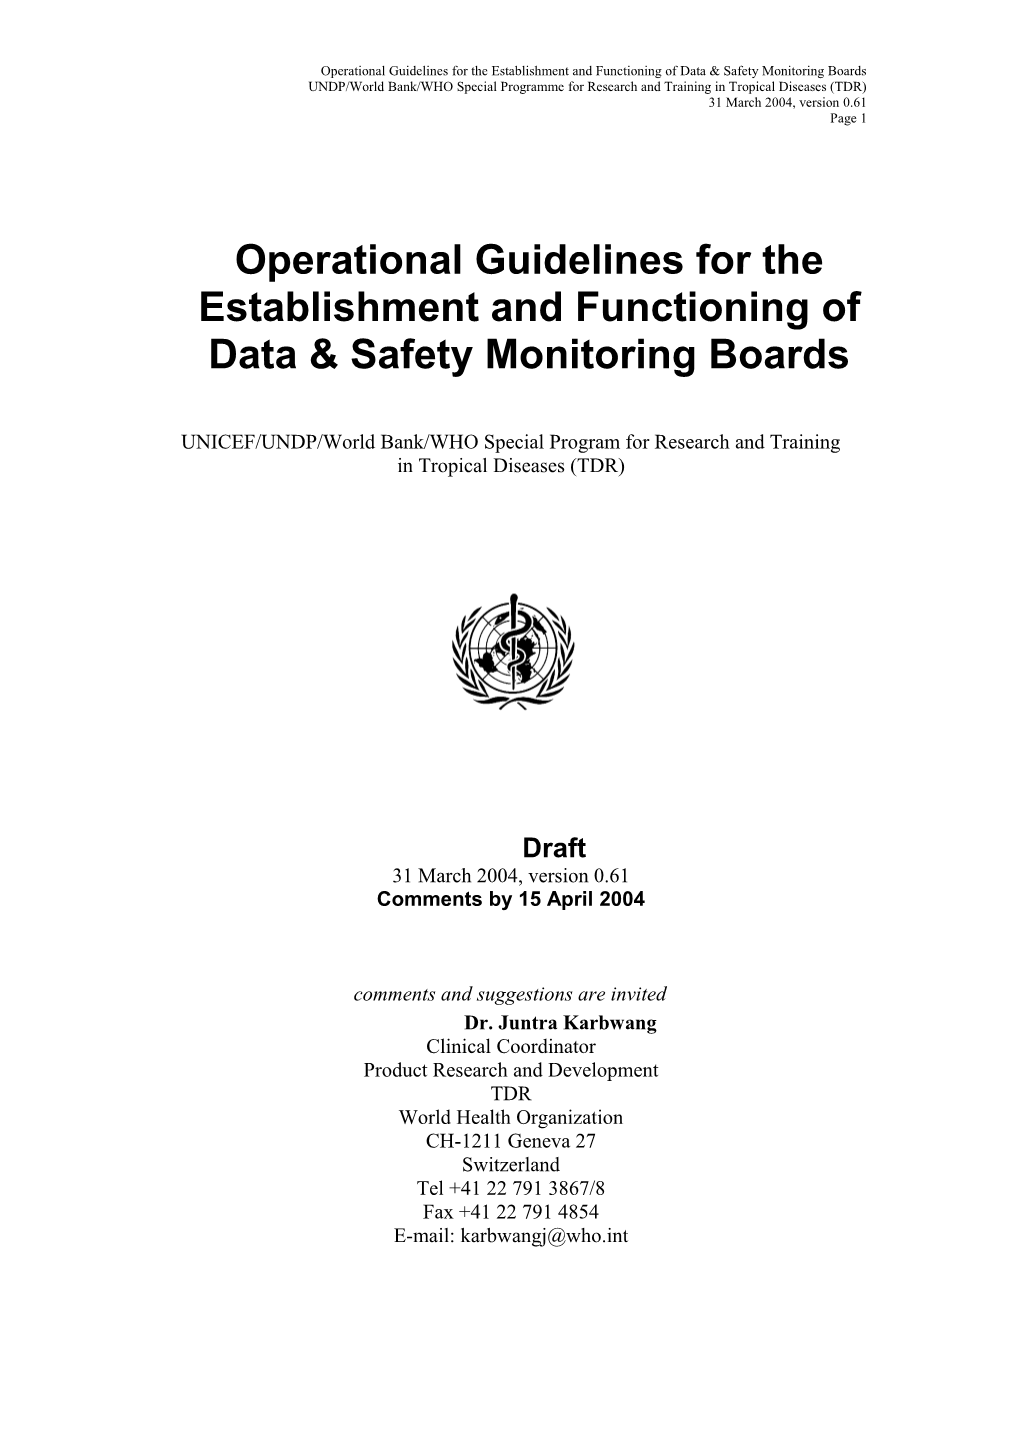 Operational Guidelines for Dsmbs